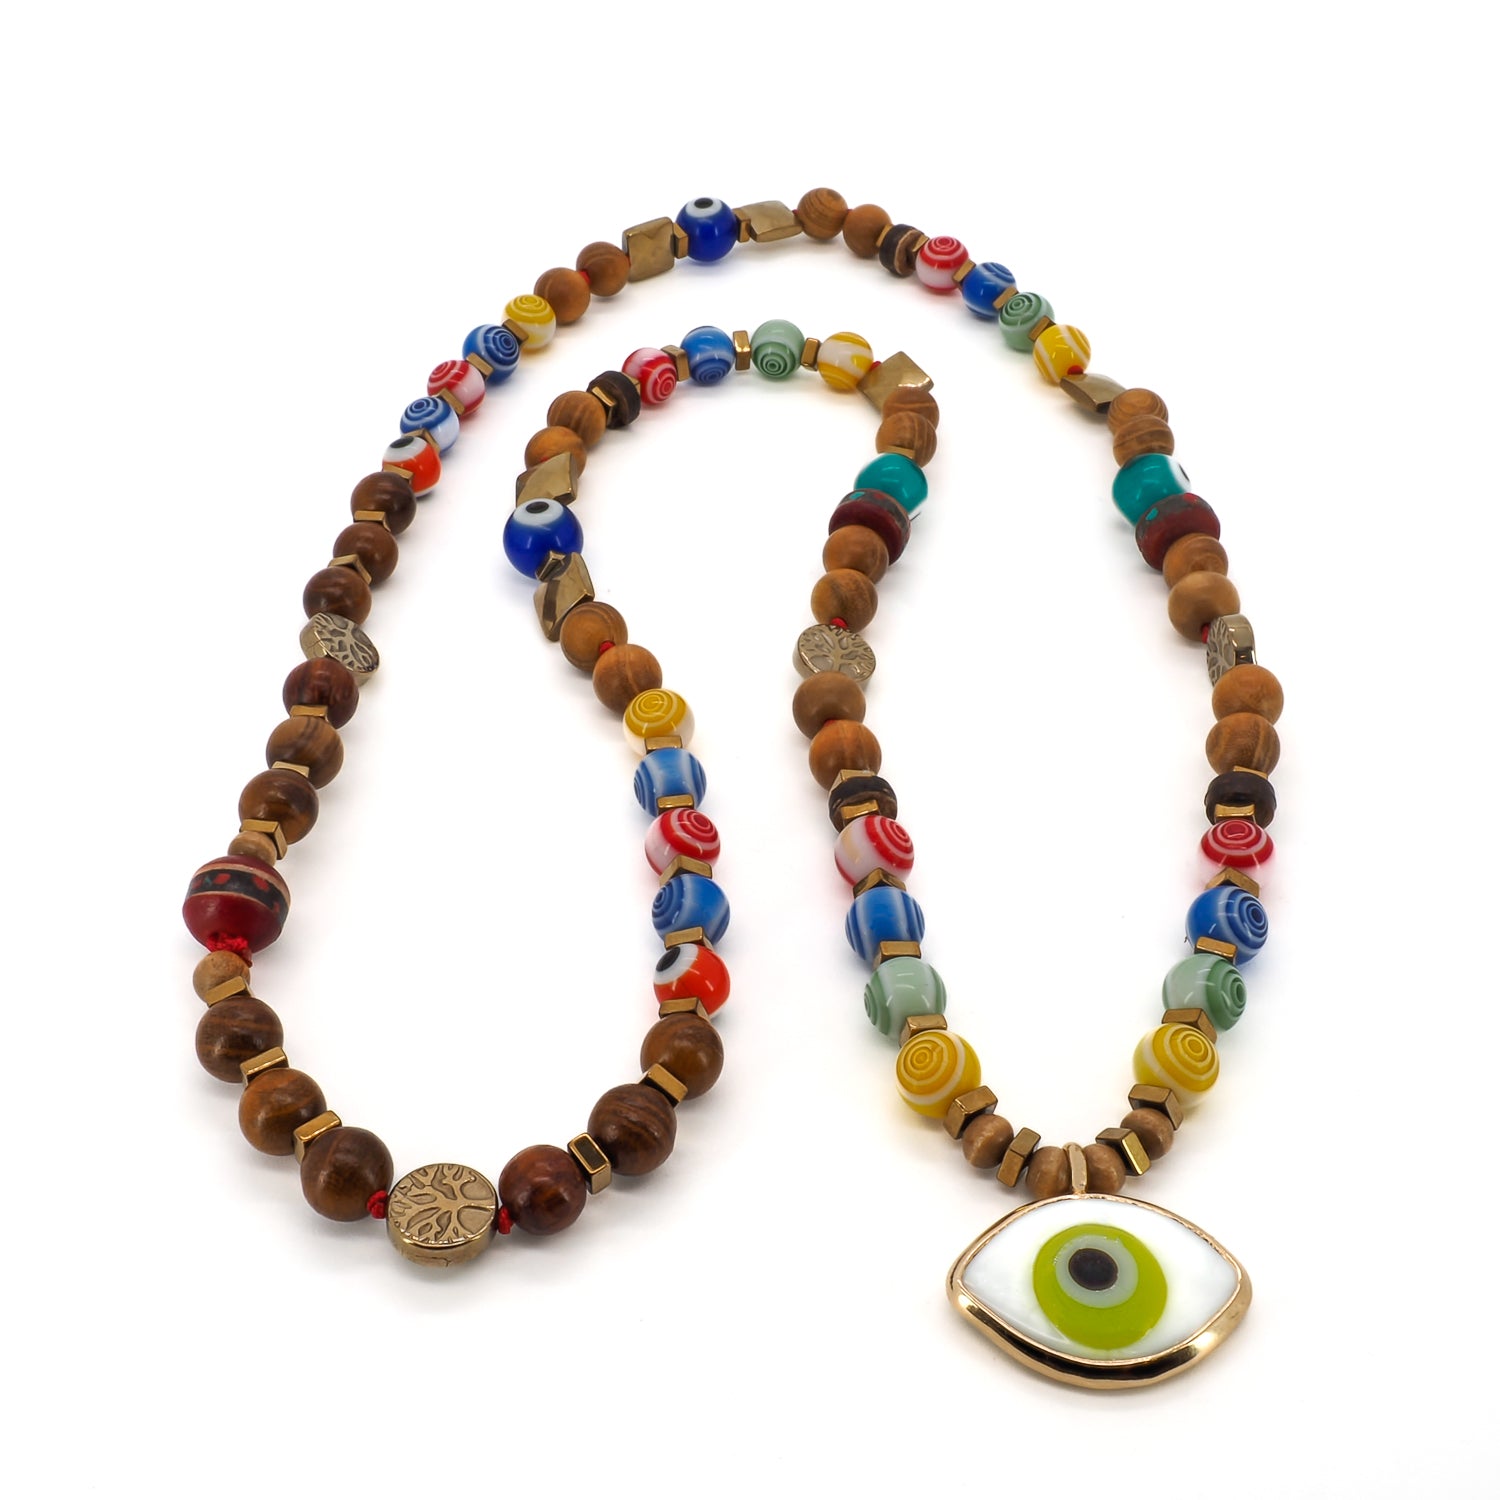 A close-up view of the Green Eye Beaded Necklace, showcasing the intricate details of the colorful glass evil eye beads, gold hematite stone beads, and tree of life beads. 